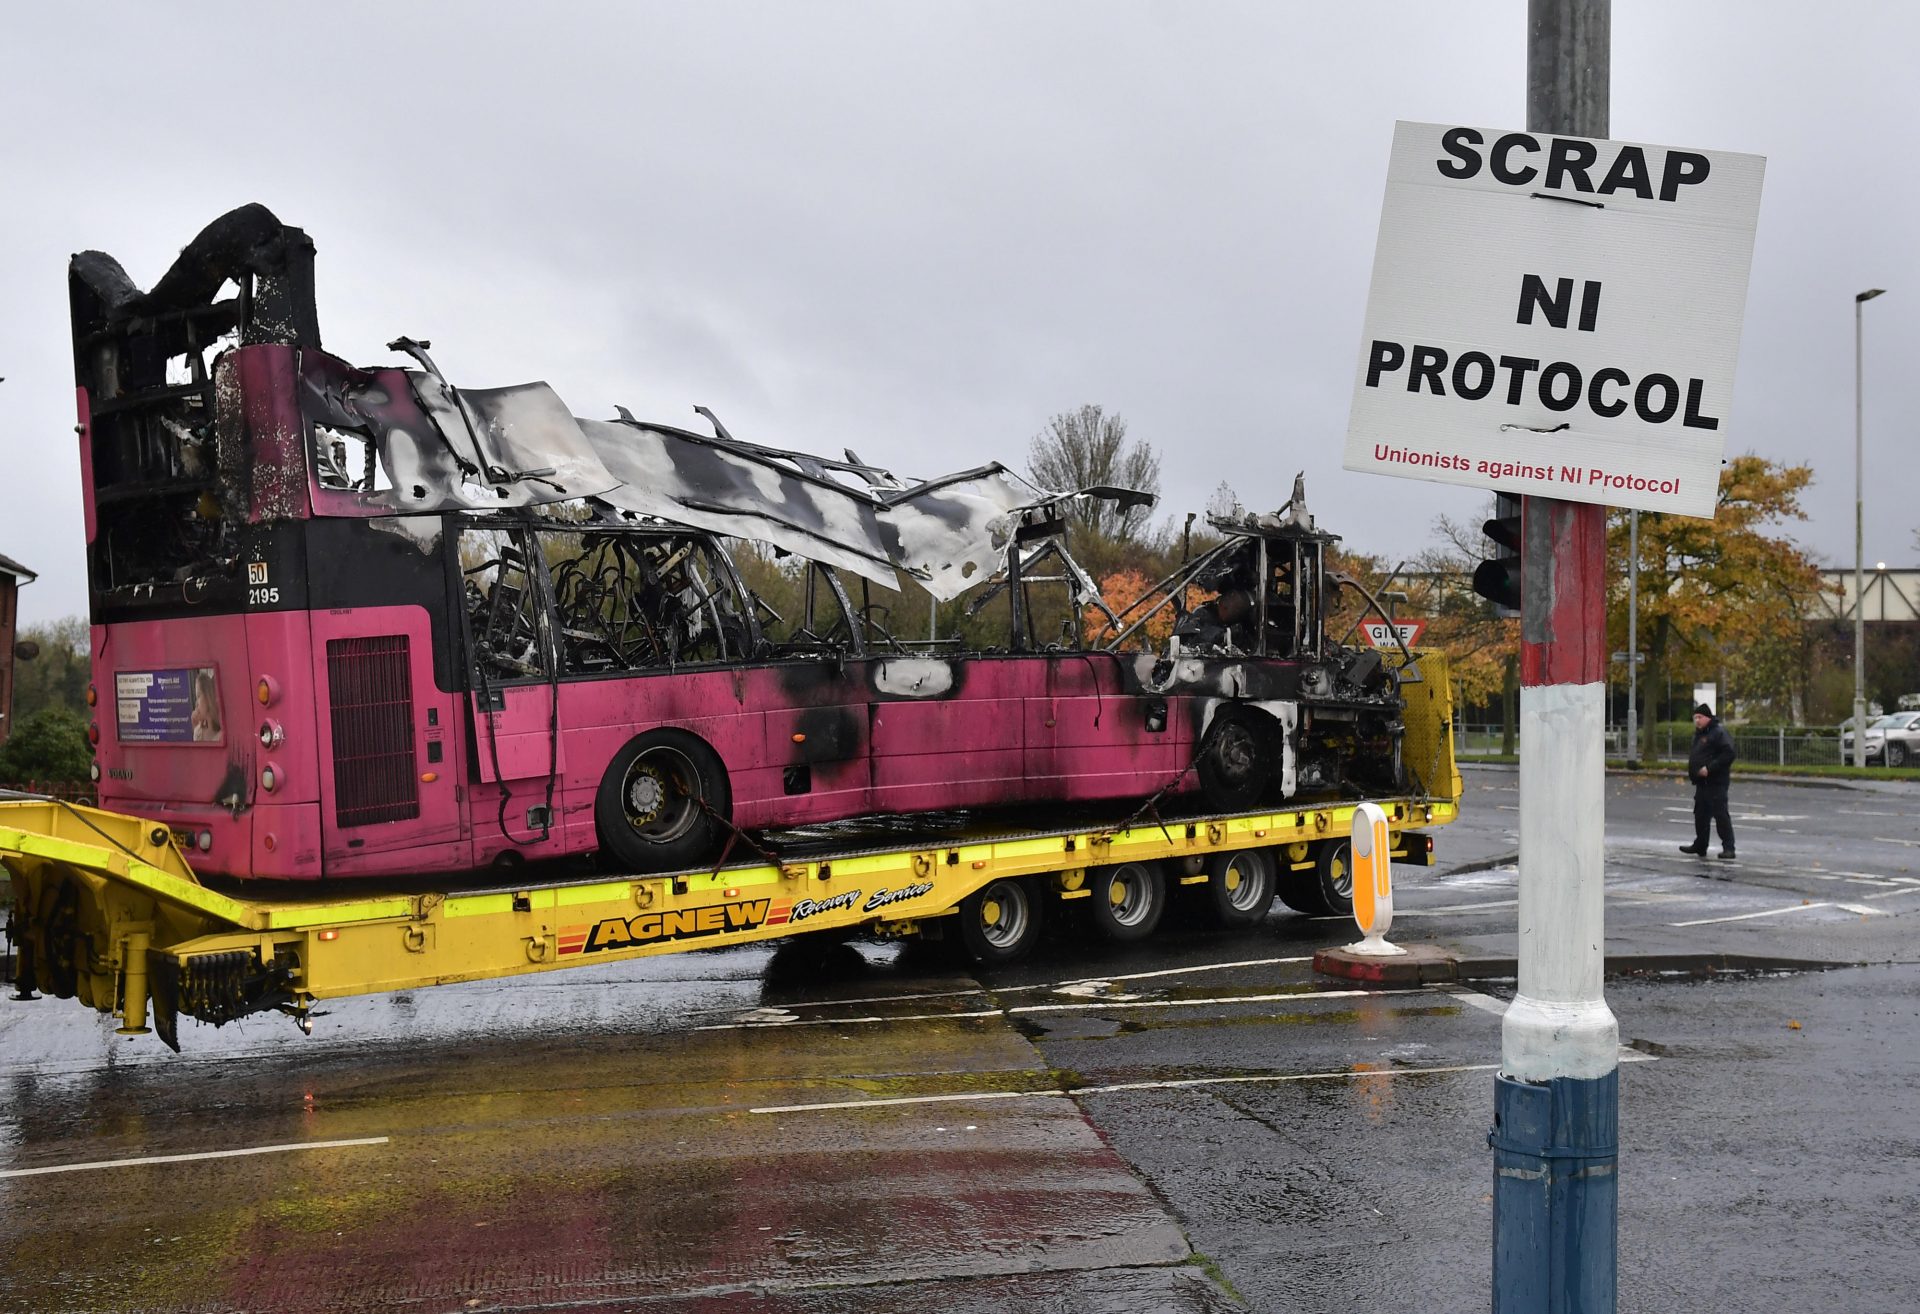 A bus hijacked and burnt by loyalists protesting against the Northern Ireland Protocol is removed from an estate (Photo by Charles McQuillan/Getty Images)